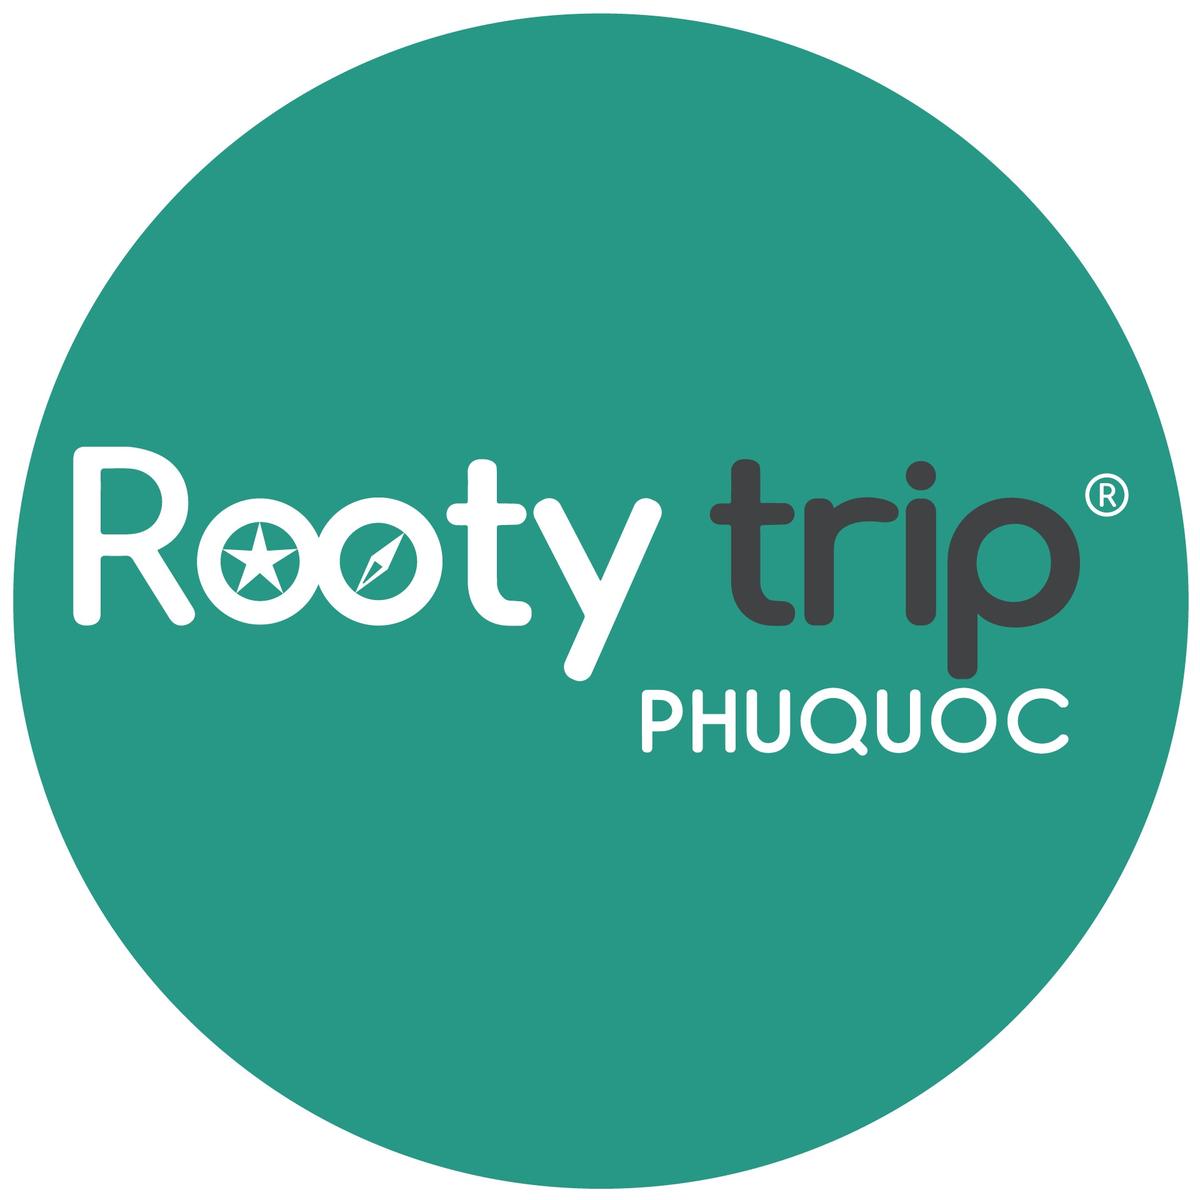 Rooty Trip's images